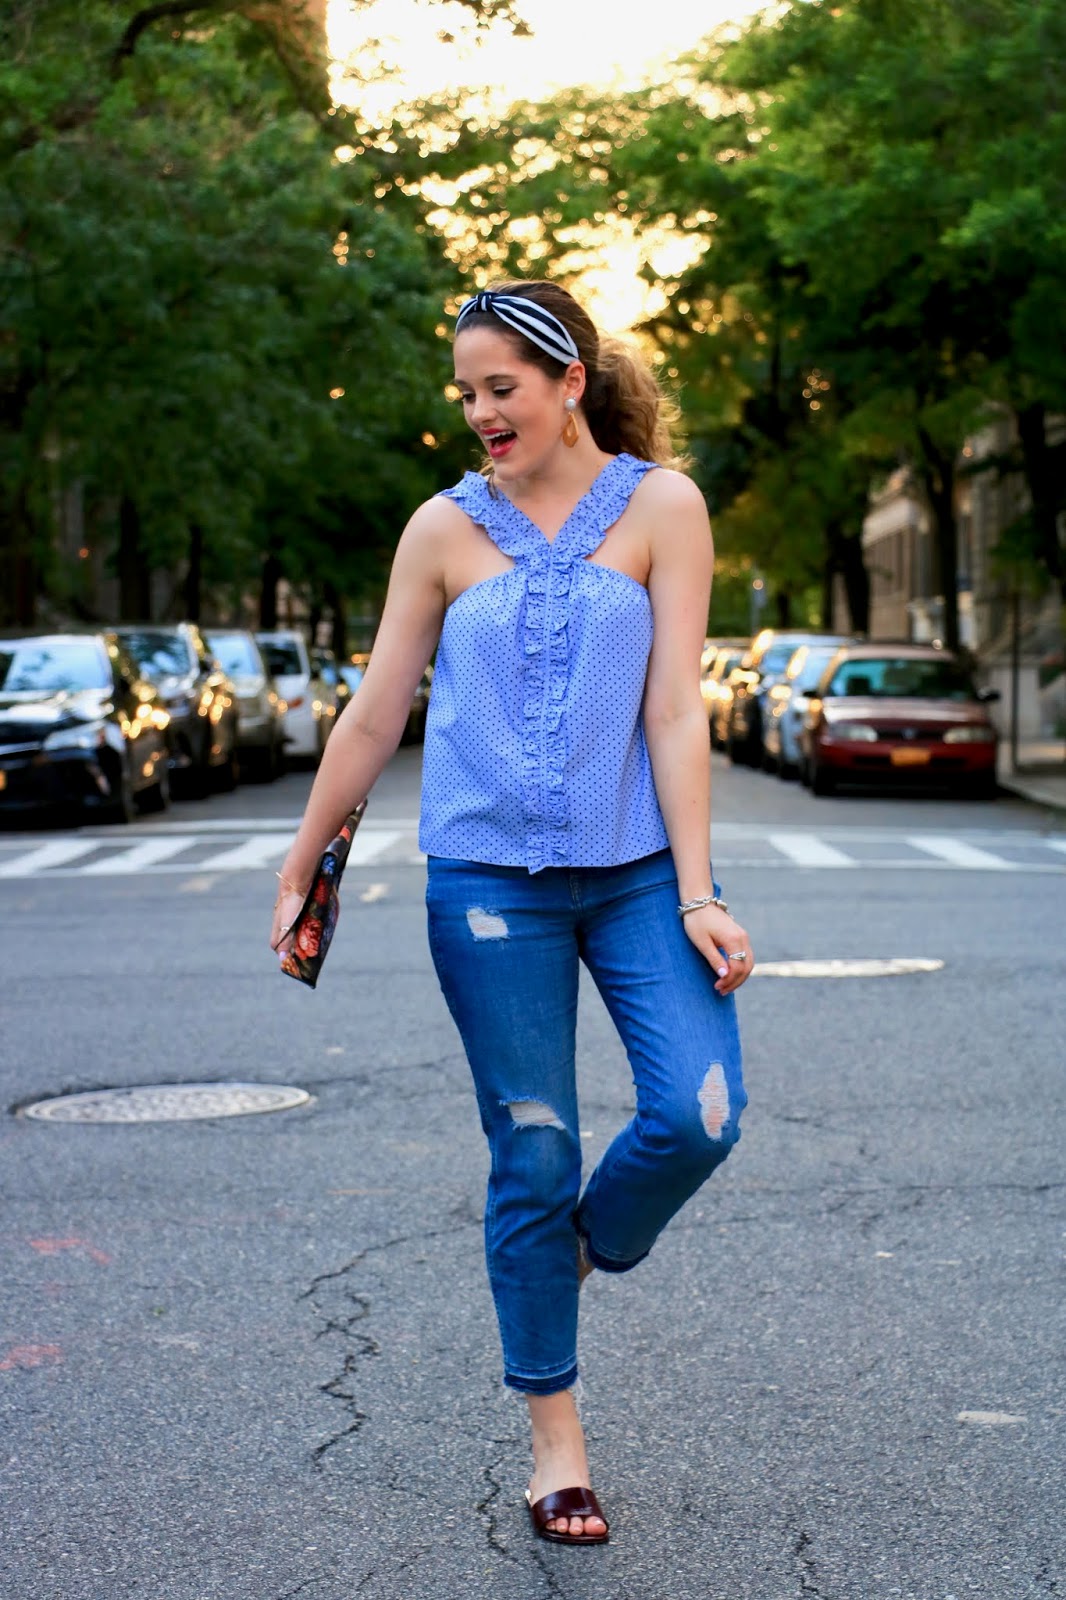 Nyc fashion blogger Kathleen Harper wearing a cute weekend outfit for spring.